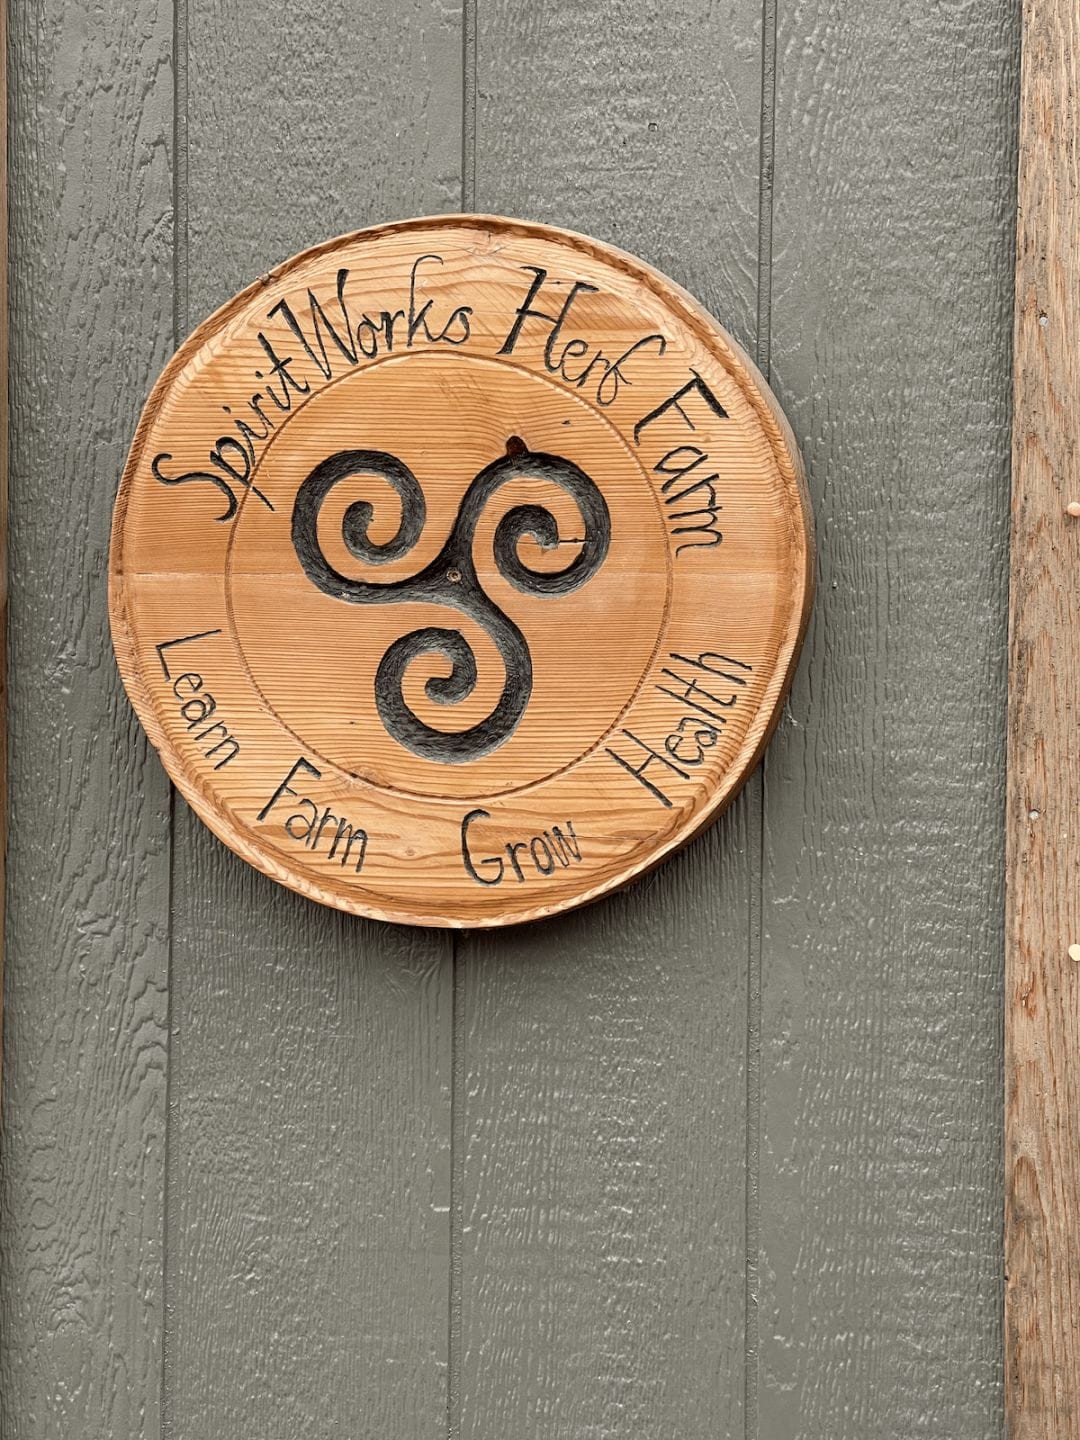 photo of a round wood plaque on the side of a grey exterior wall with text that reads "spirit works herb farm, learn farm grow health"